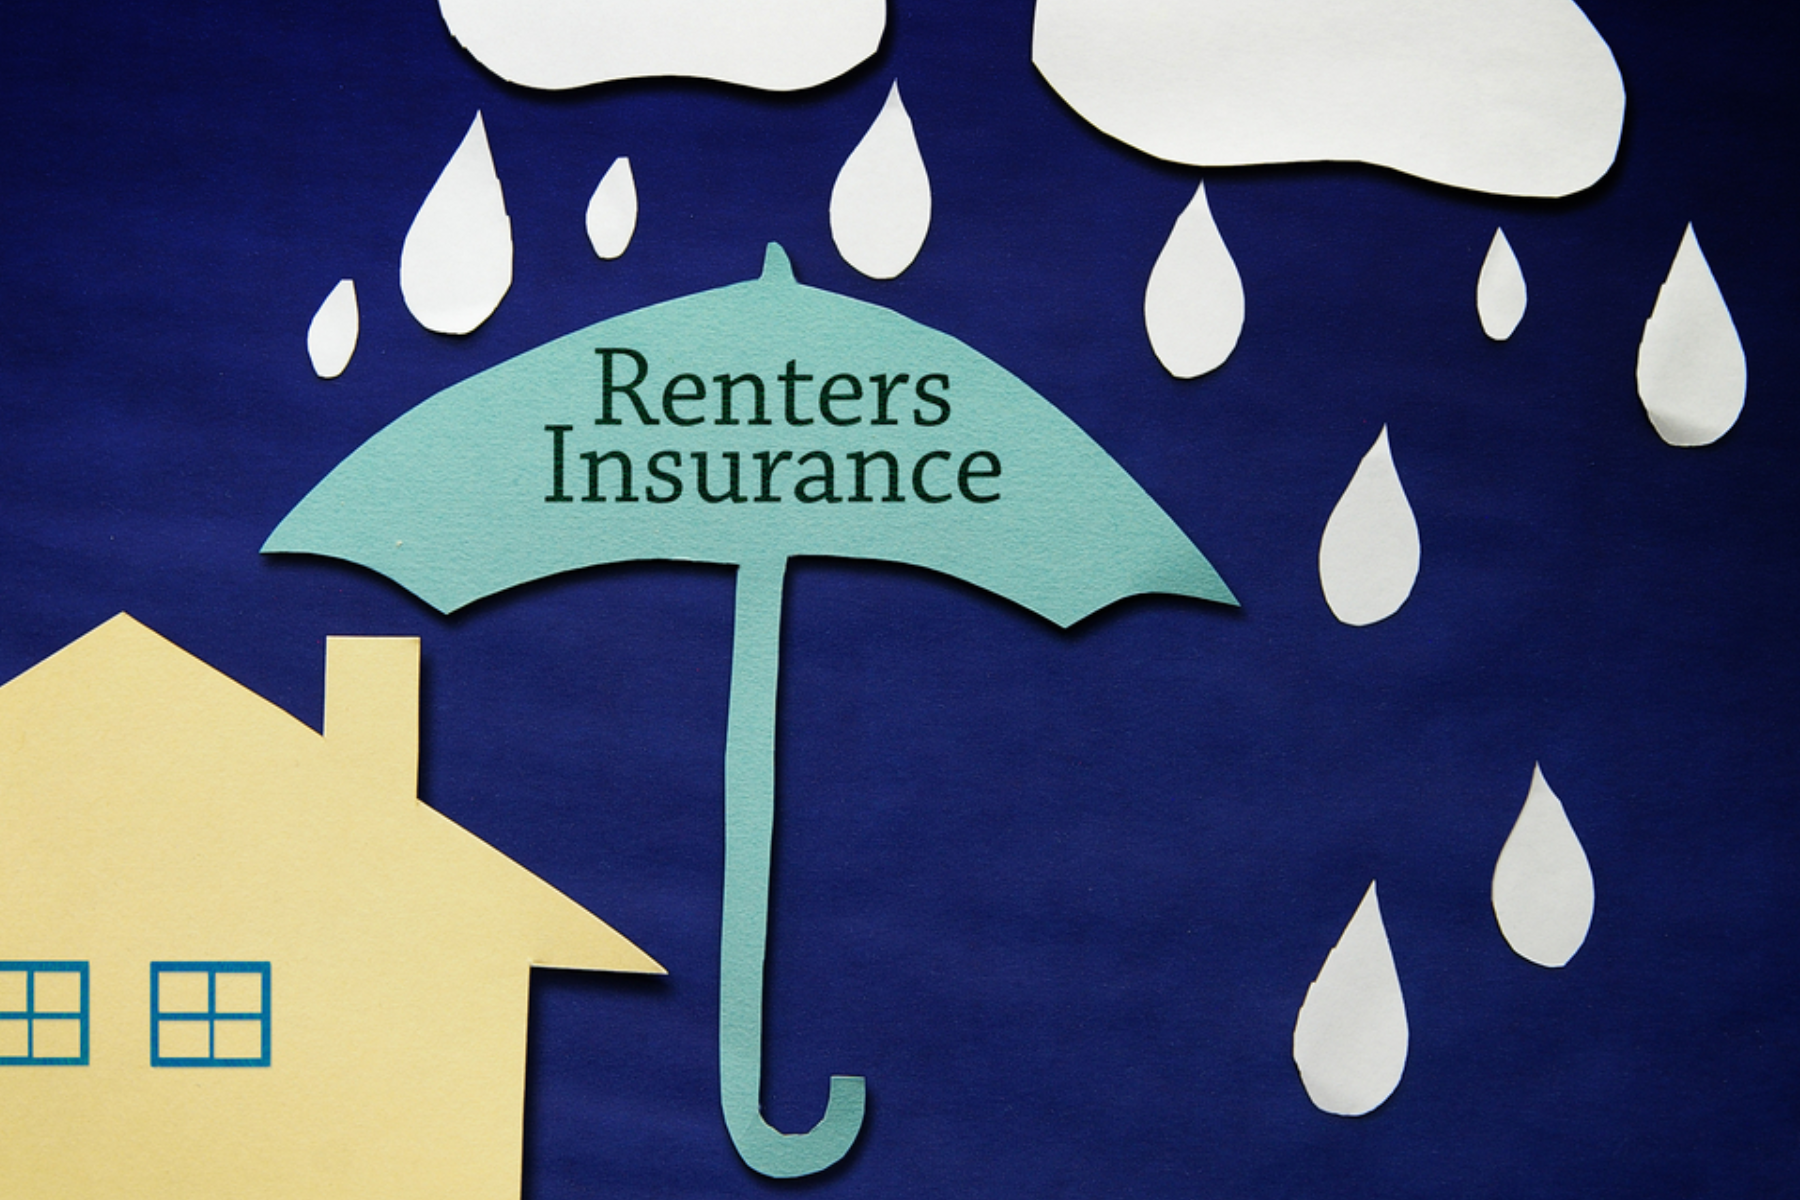 A house with a large umbrella represents the renter's insurance that protects the house from rain